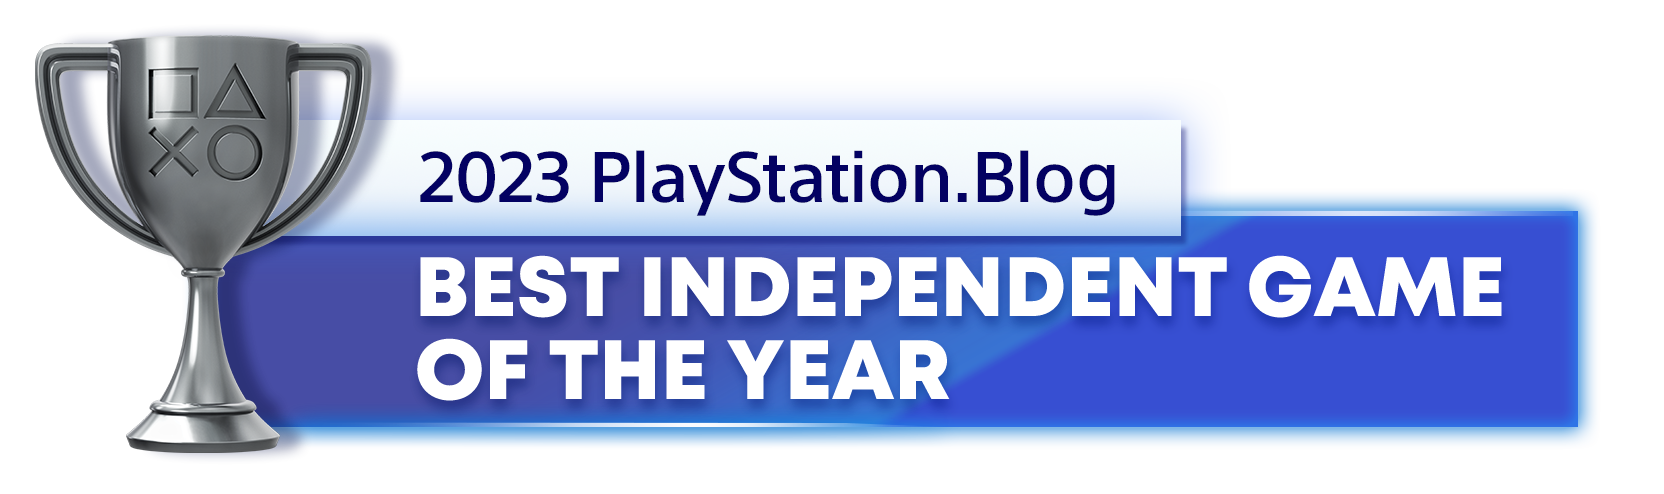  "Silver Trophy for the 2023 PlayStation Blog Best Independent Game of the Year Winner"